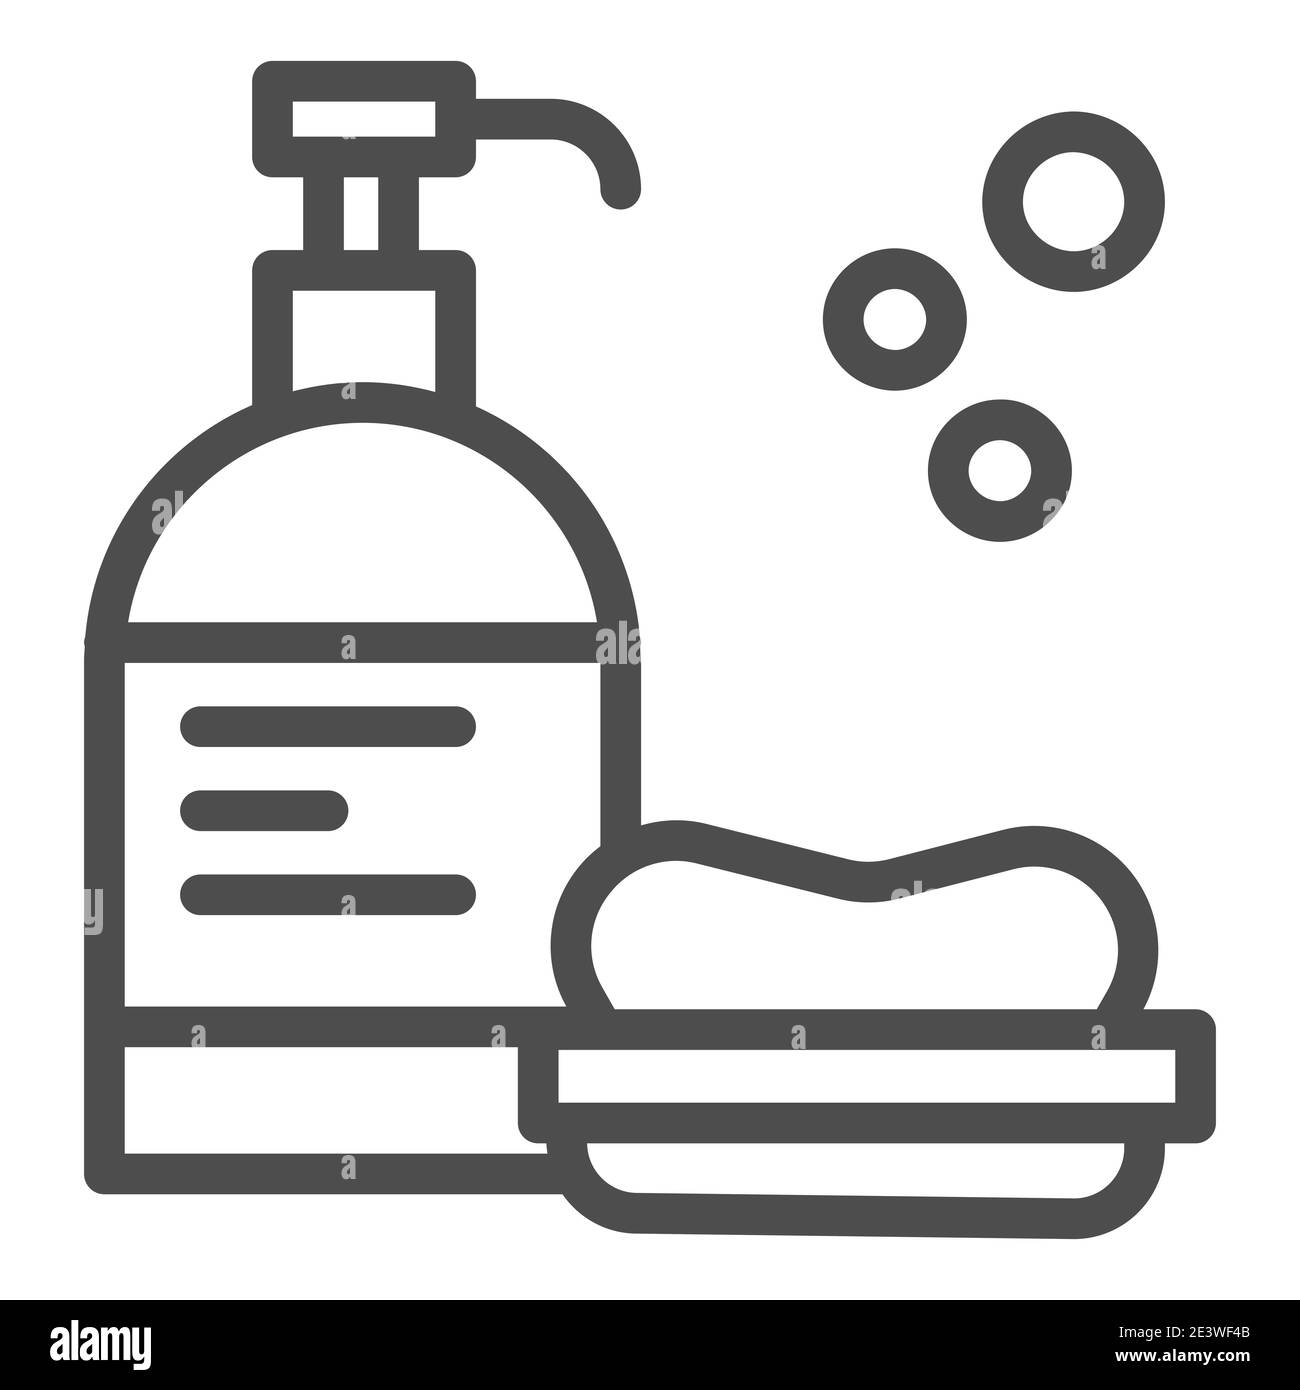 Licquid gel and soap line icon, Personal hygiene concept, Hand soap and lotion sign on white background, bathing stuff icon set in outline style for Stock Vector